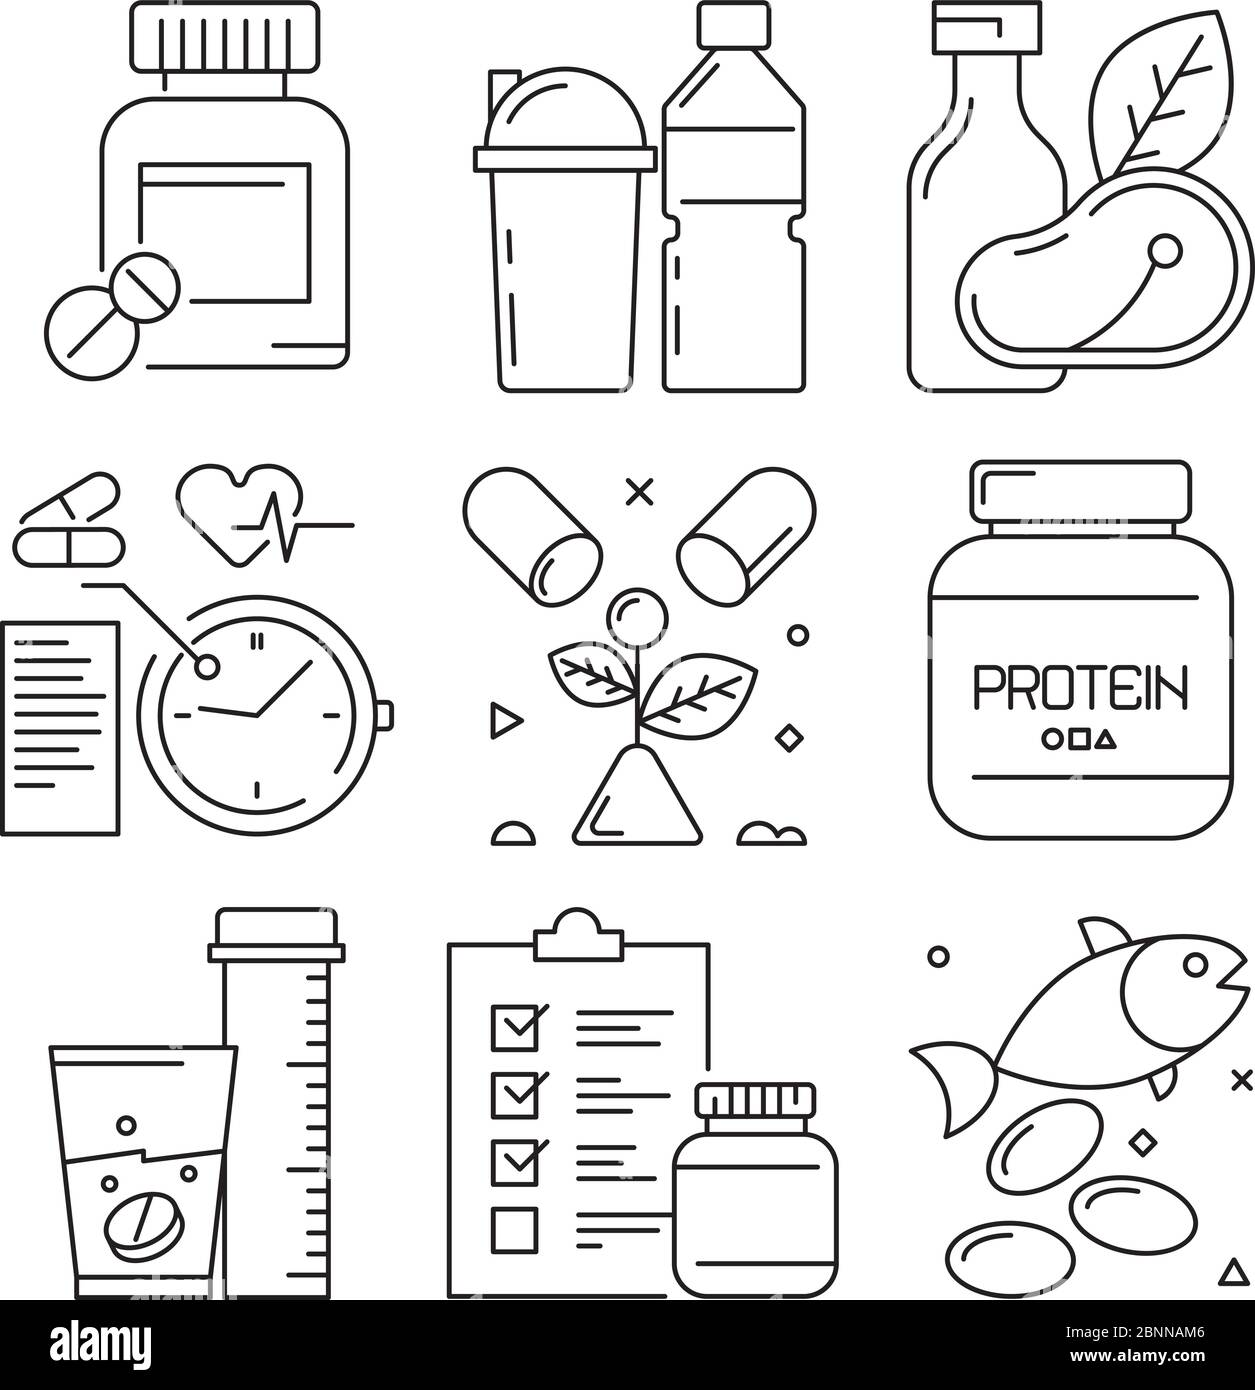 Fitness dietary icons. Sport activities food supplement health vitamins gym exercise well training vector line symbols Stock Vector